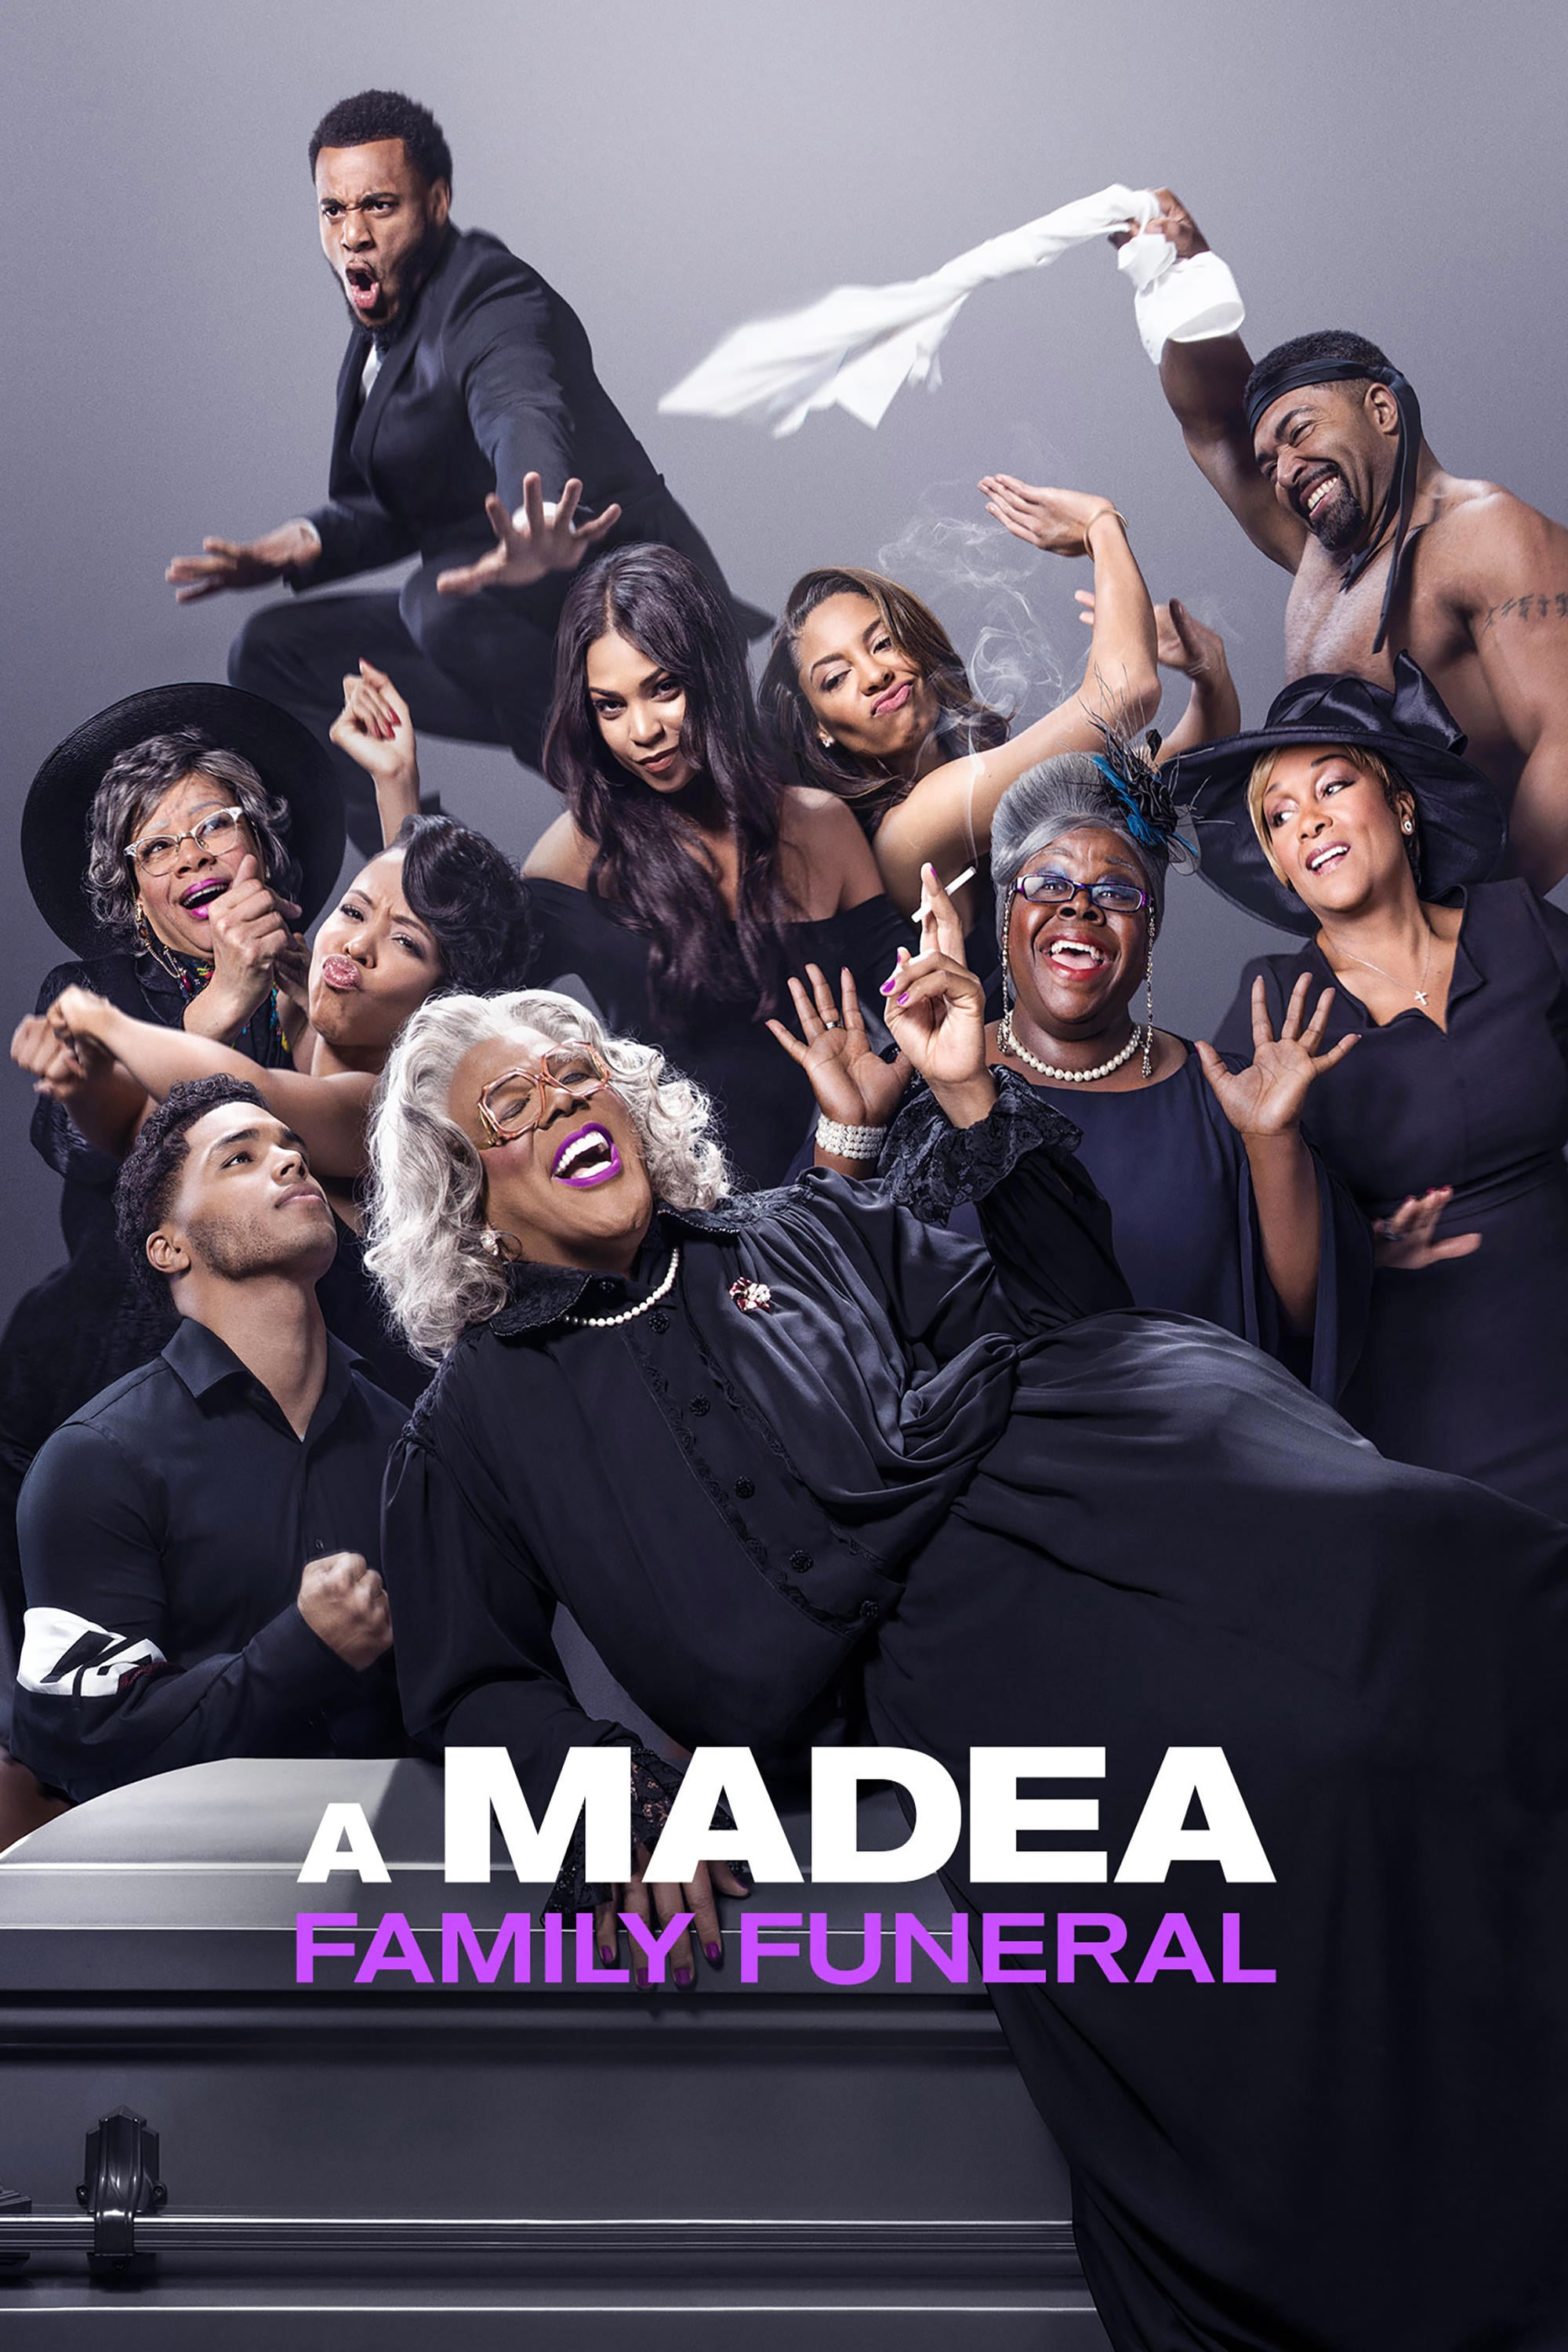 Poster for the movie "A Madea Family Funeral"